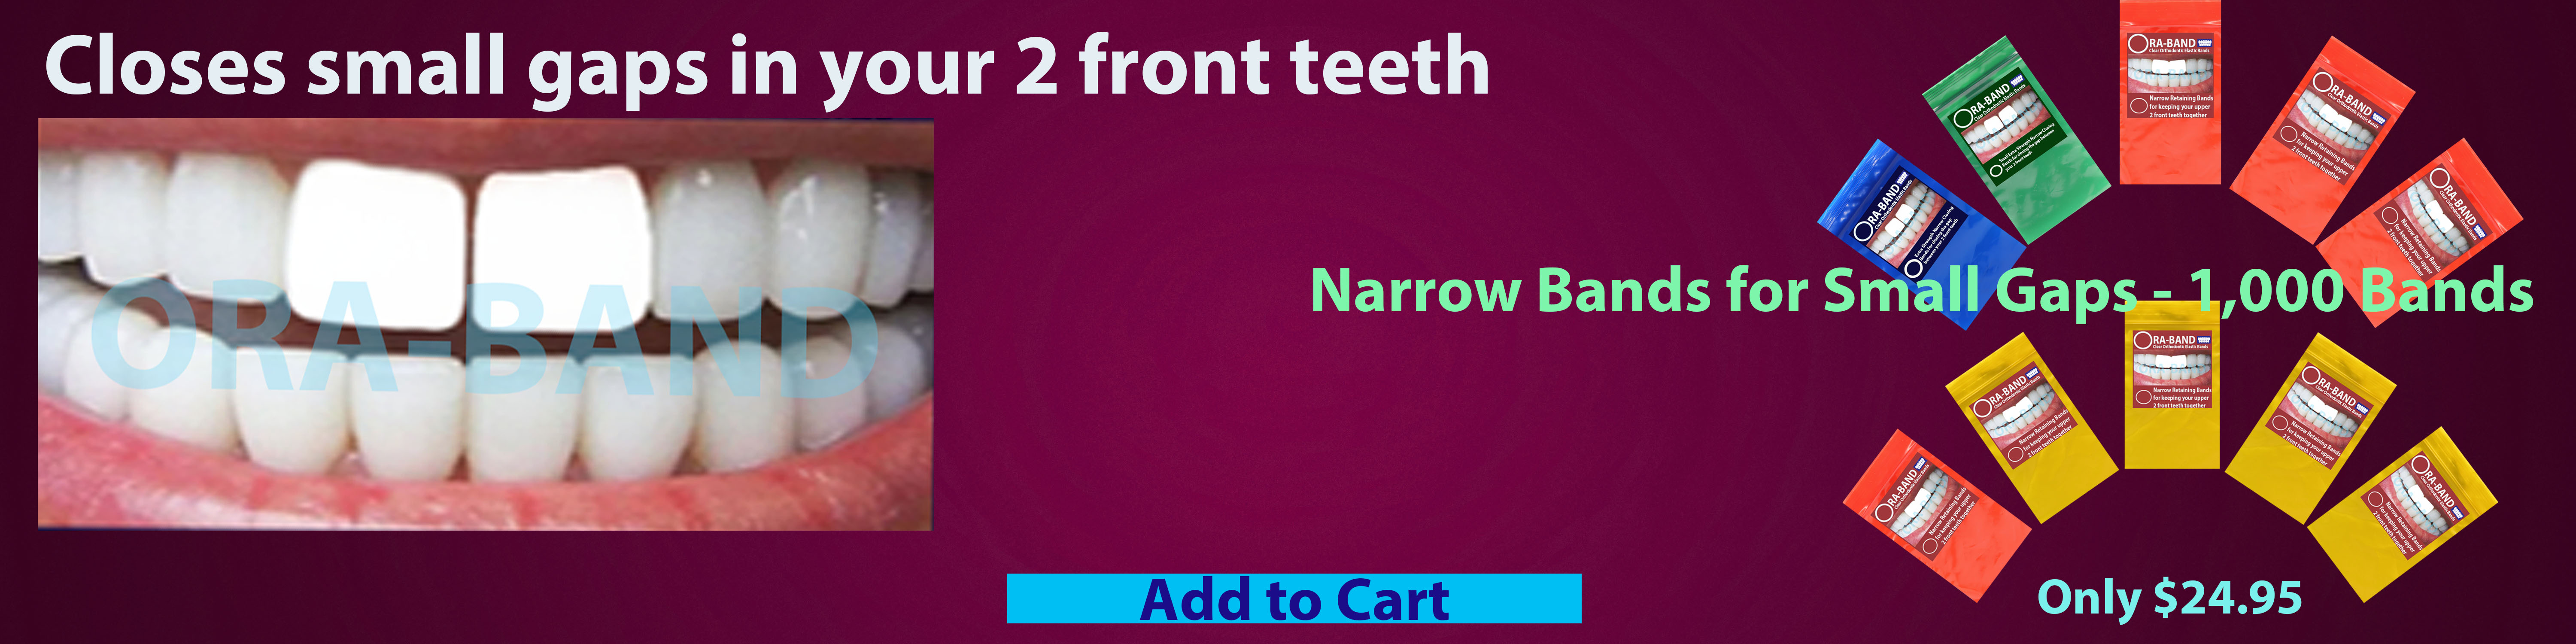 ORA-BAND 1,000 Band Narrow Bands Package for 
Small Gaps between your 2 front teeth